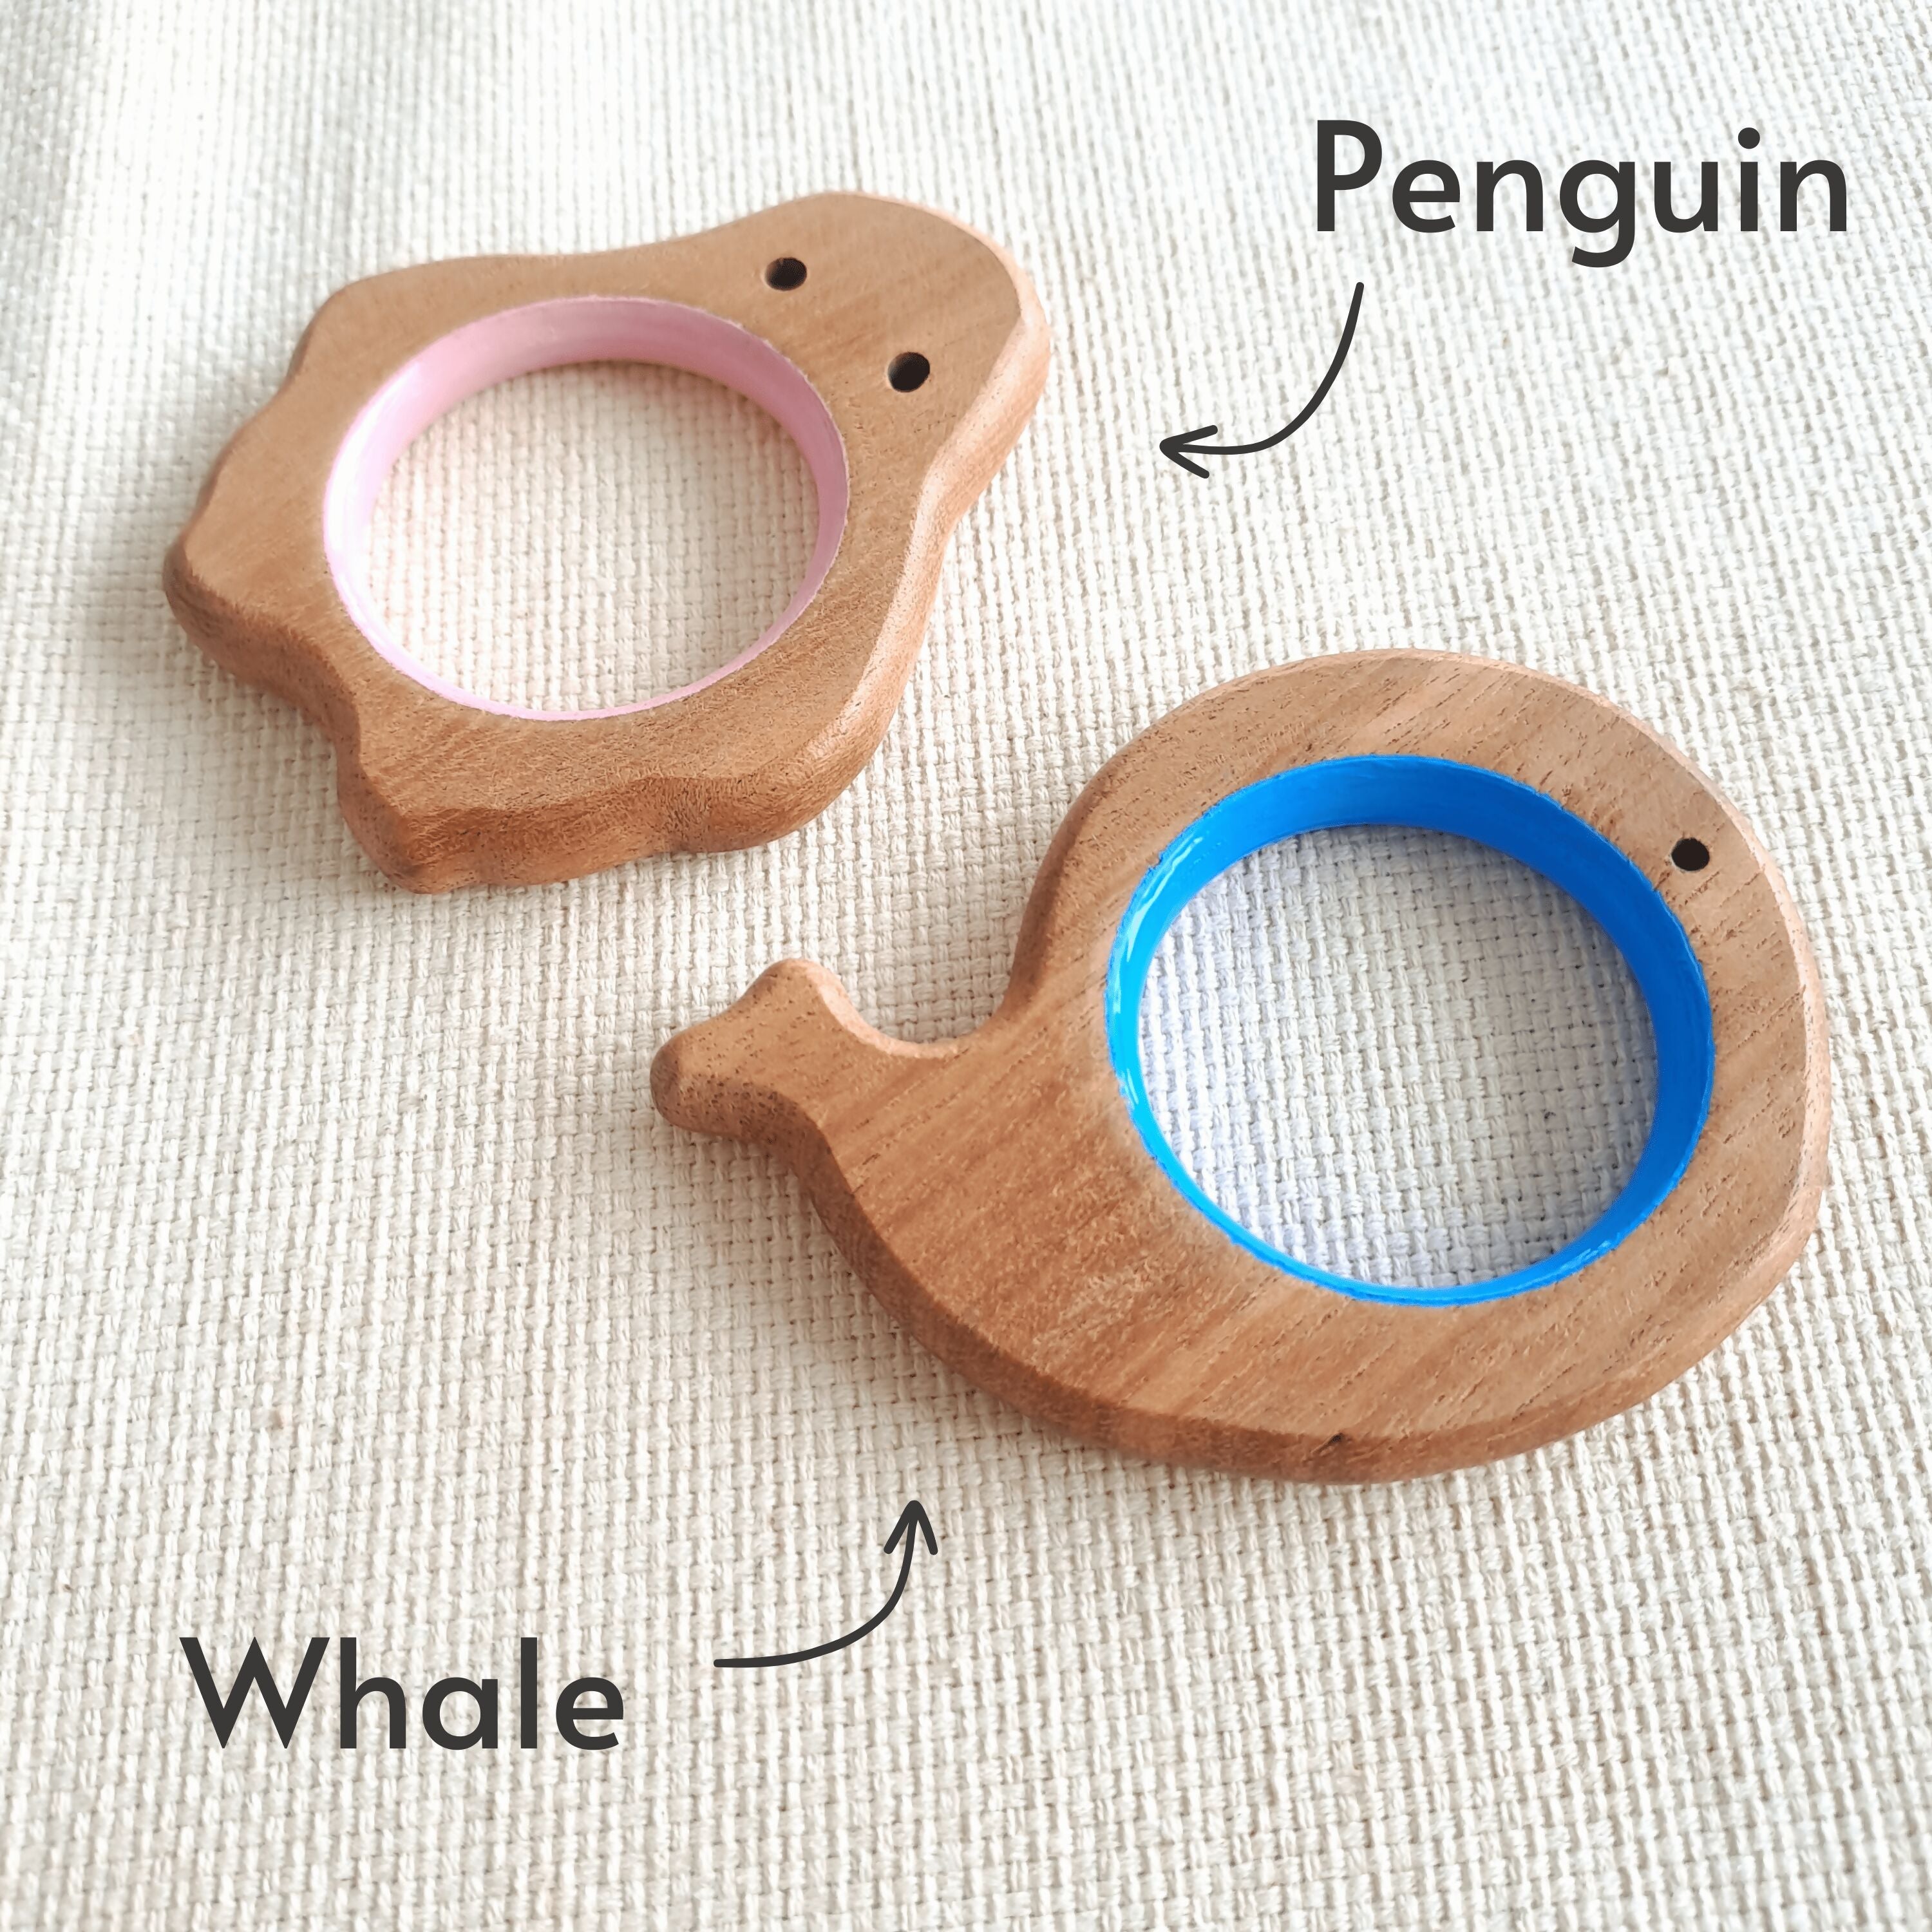 BABYCOV Cute Whale and Penguin Natural Neem Wood Teethers for Babies | Natural and Safe | Goodness of Organic Neem Wood | Both Chewing and Grasping Toy | Set of 2 (Age 4+ Months) - PyaraBaby